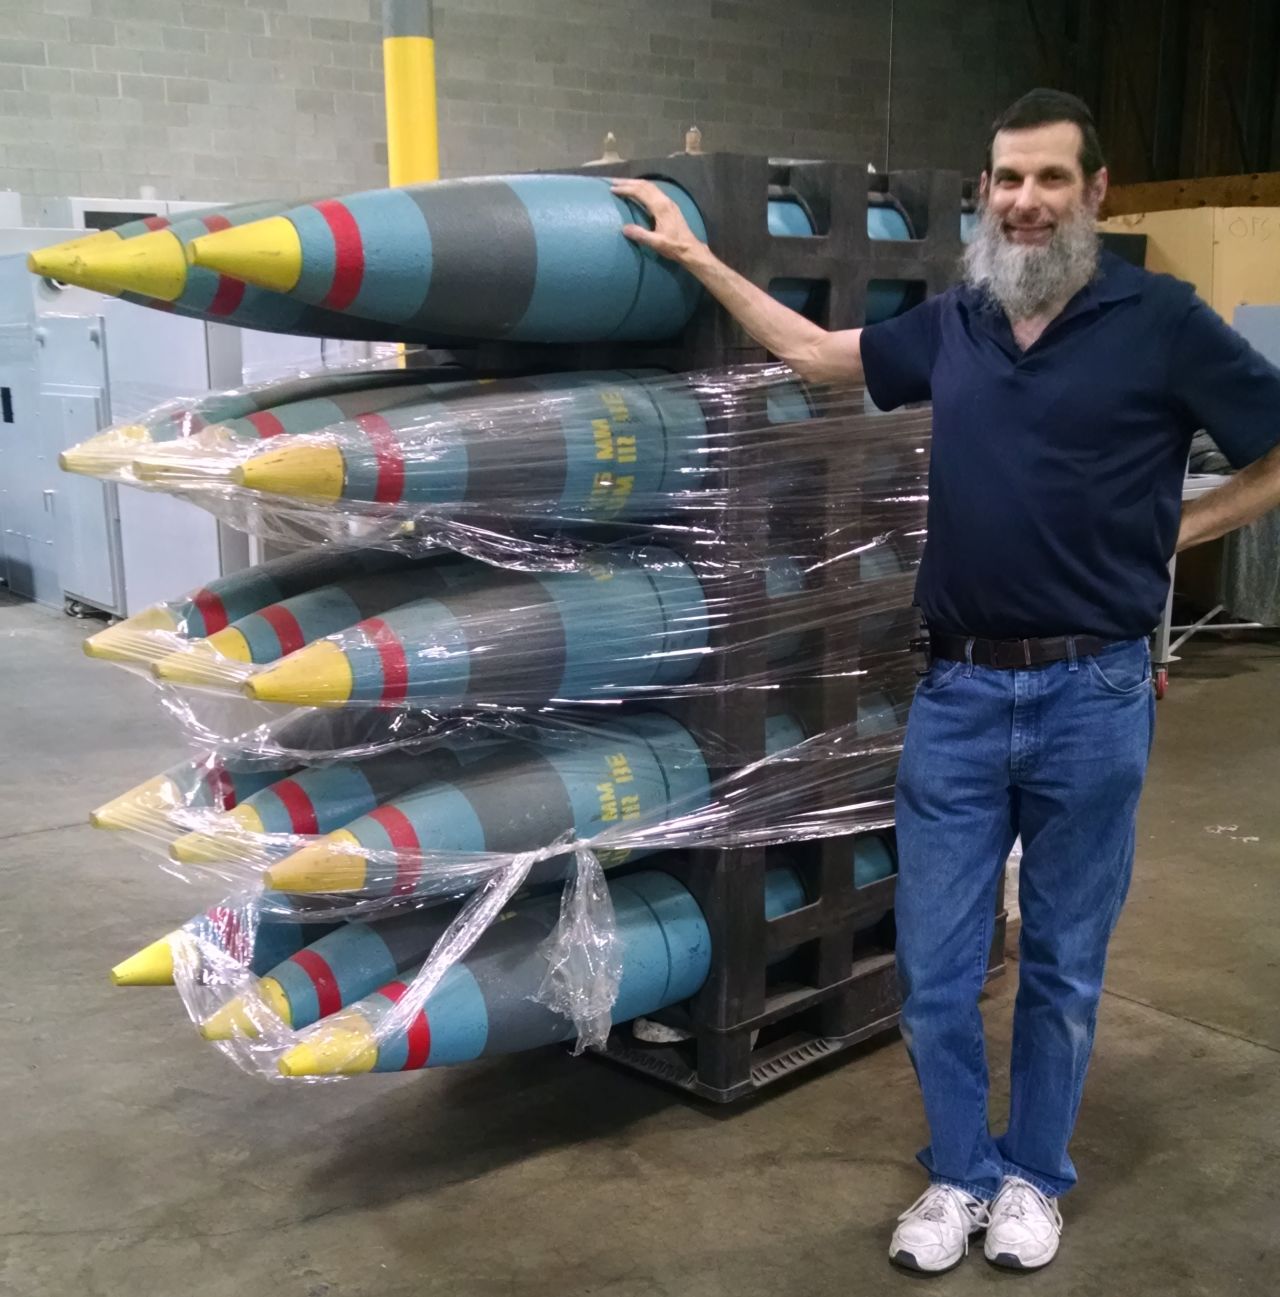 Rich "RJ" Rappaport with some prop missiles.